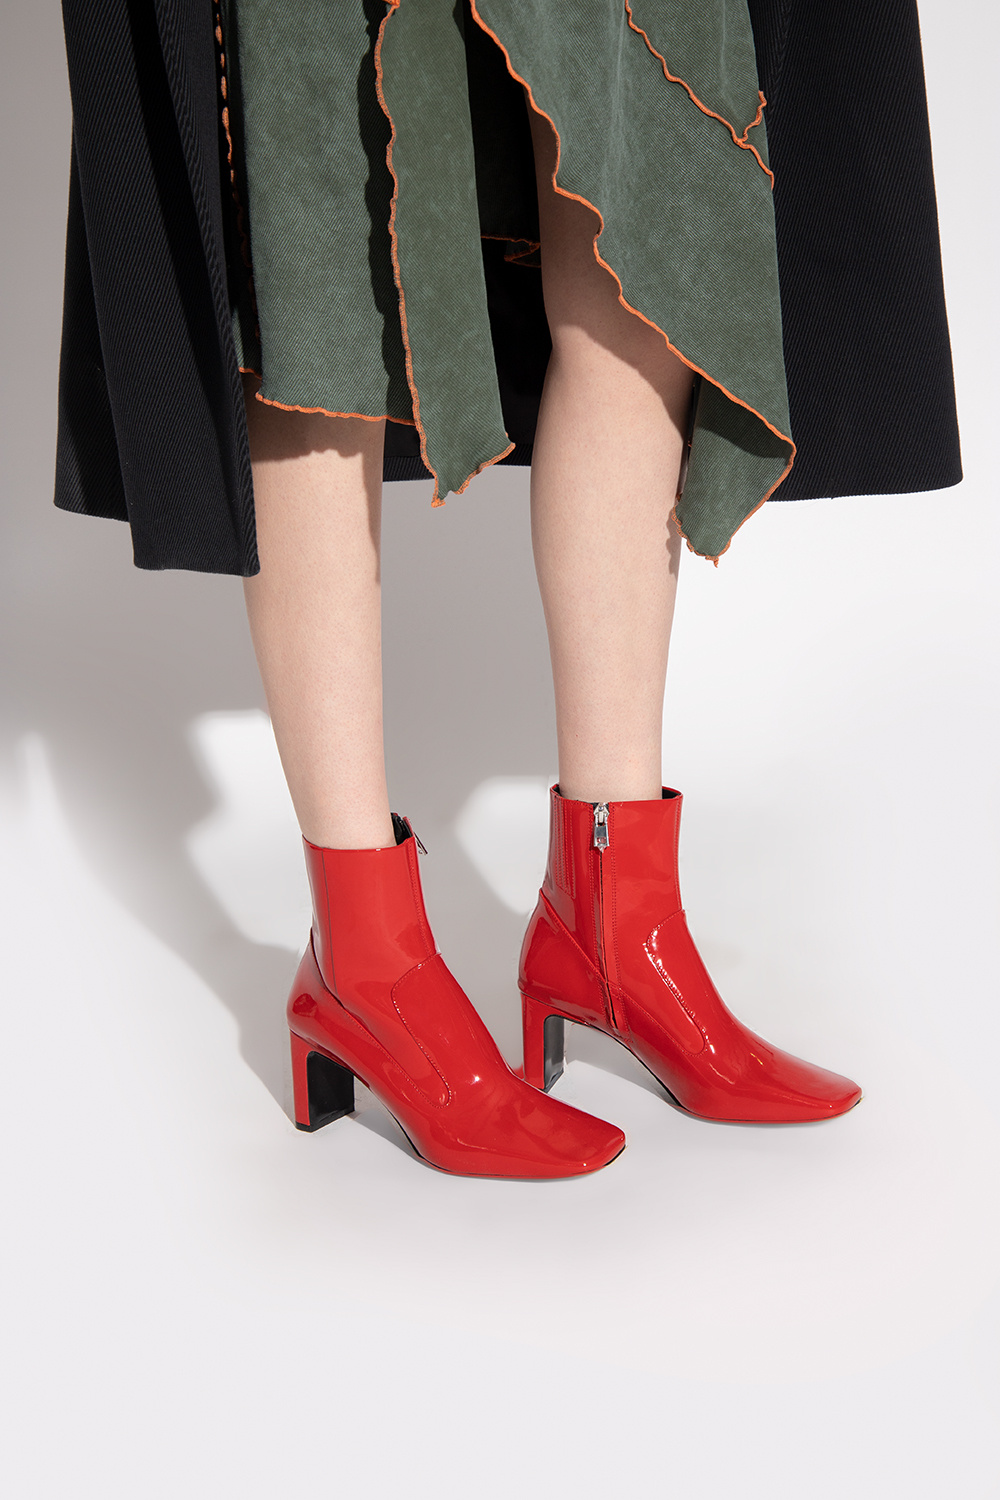 Diesel ‘D-Millenia’ heeled ankle boots